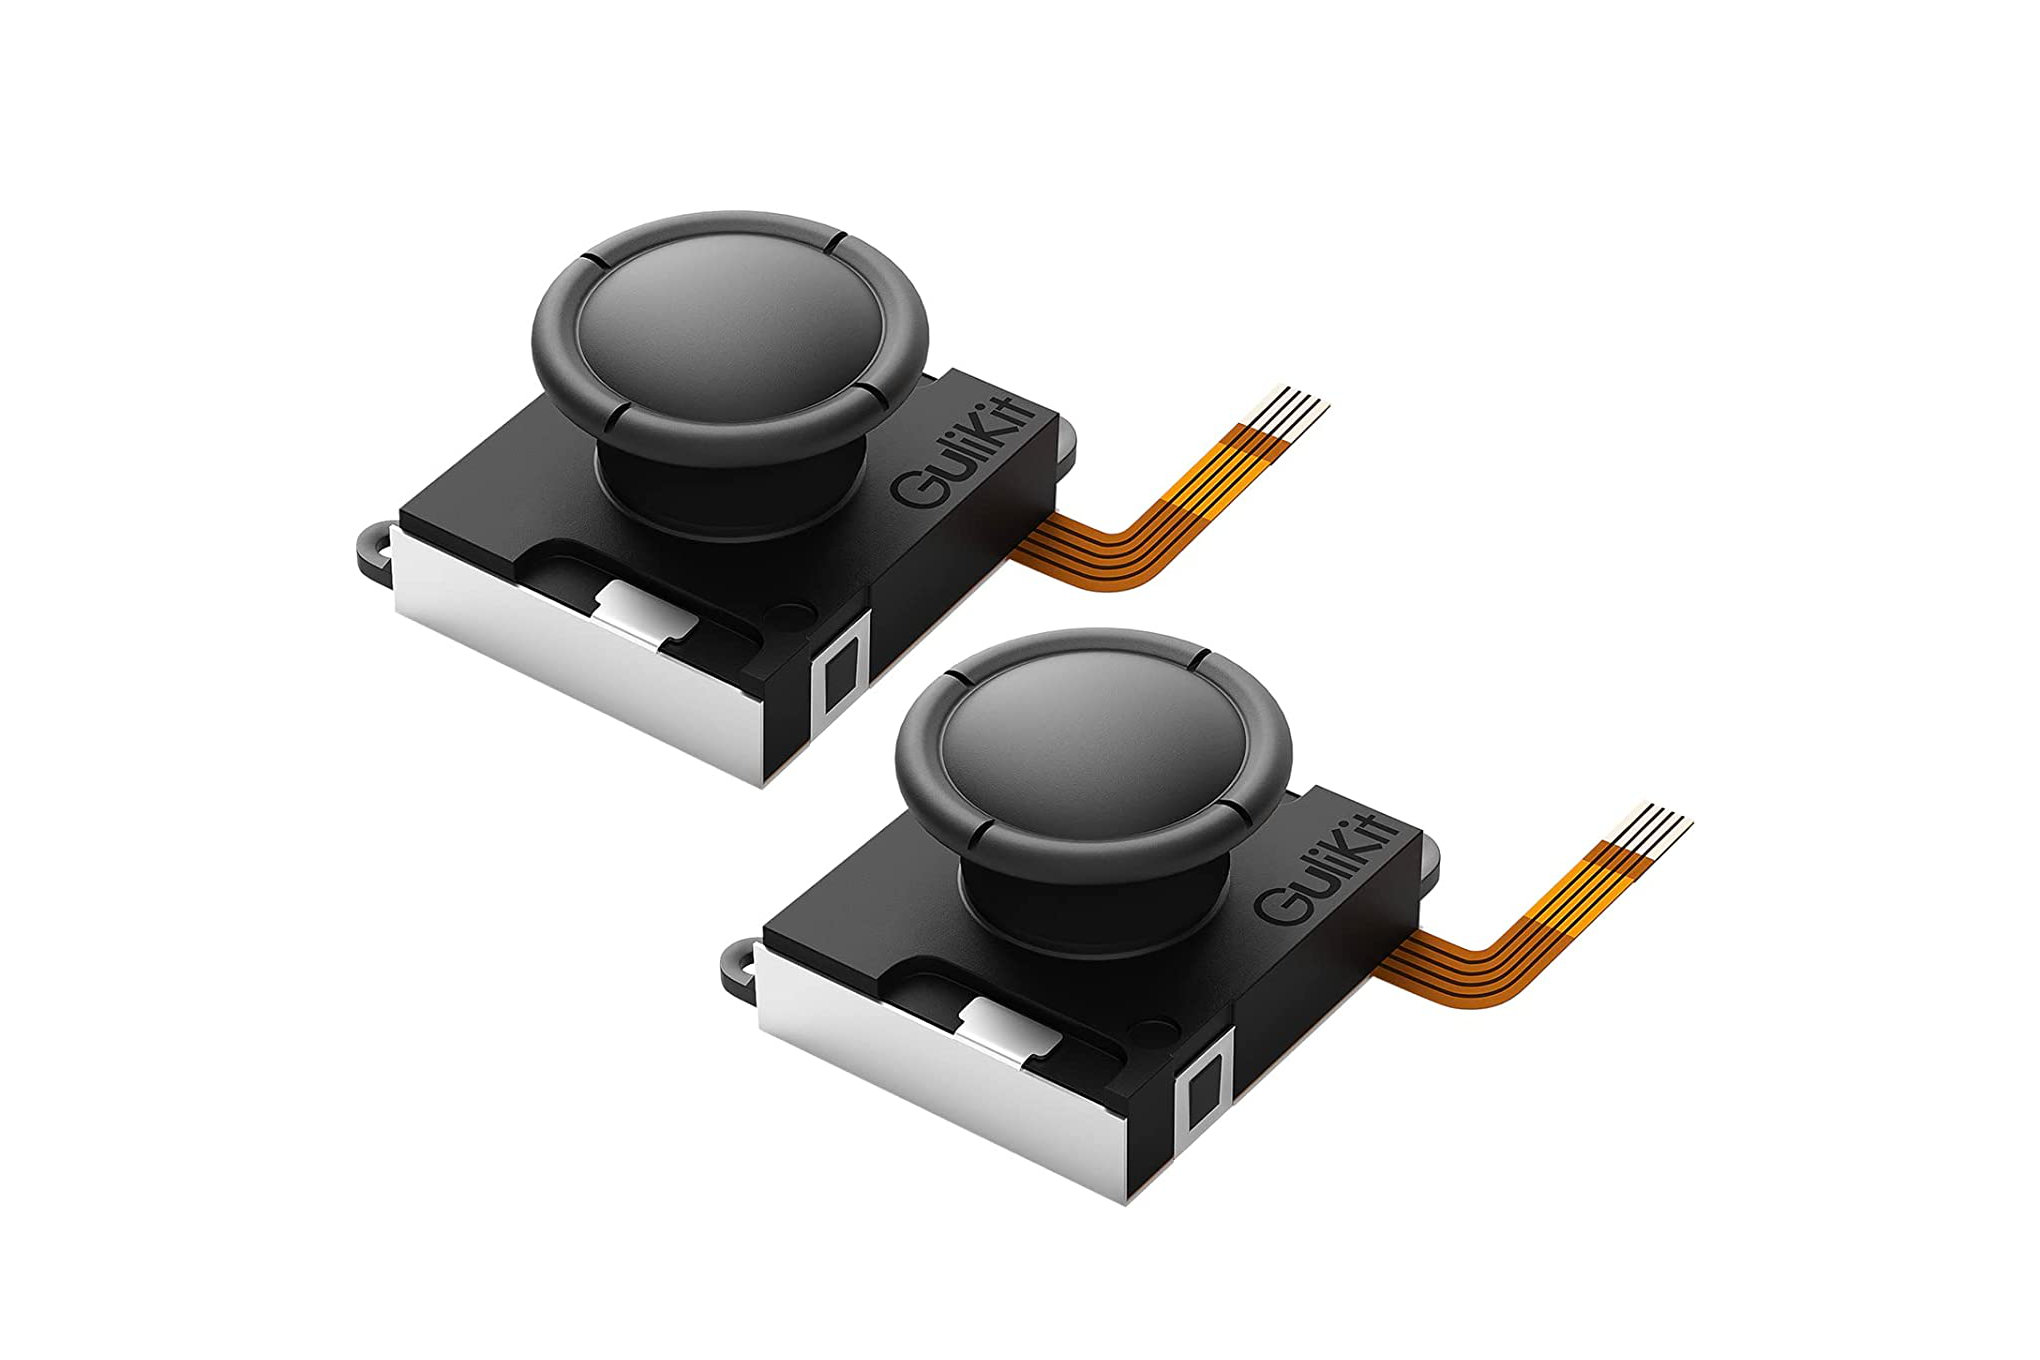 A pair of GuliKit analog joystick replacements for the Nintendo Switch Joy-Con.